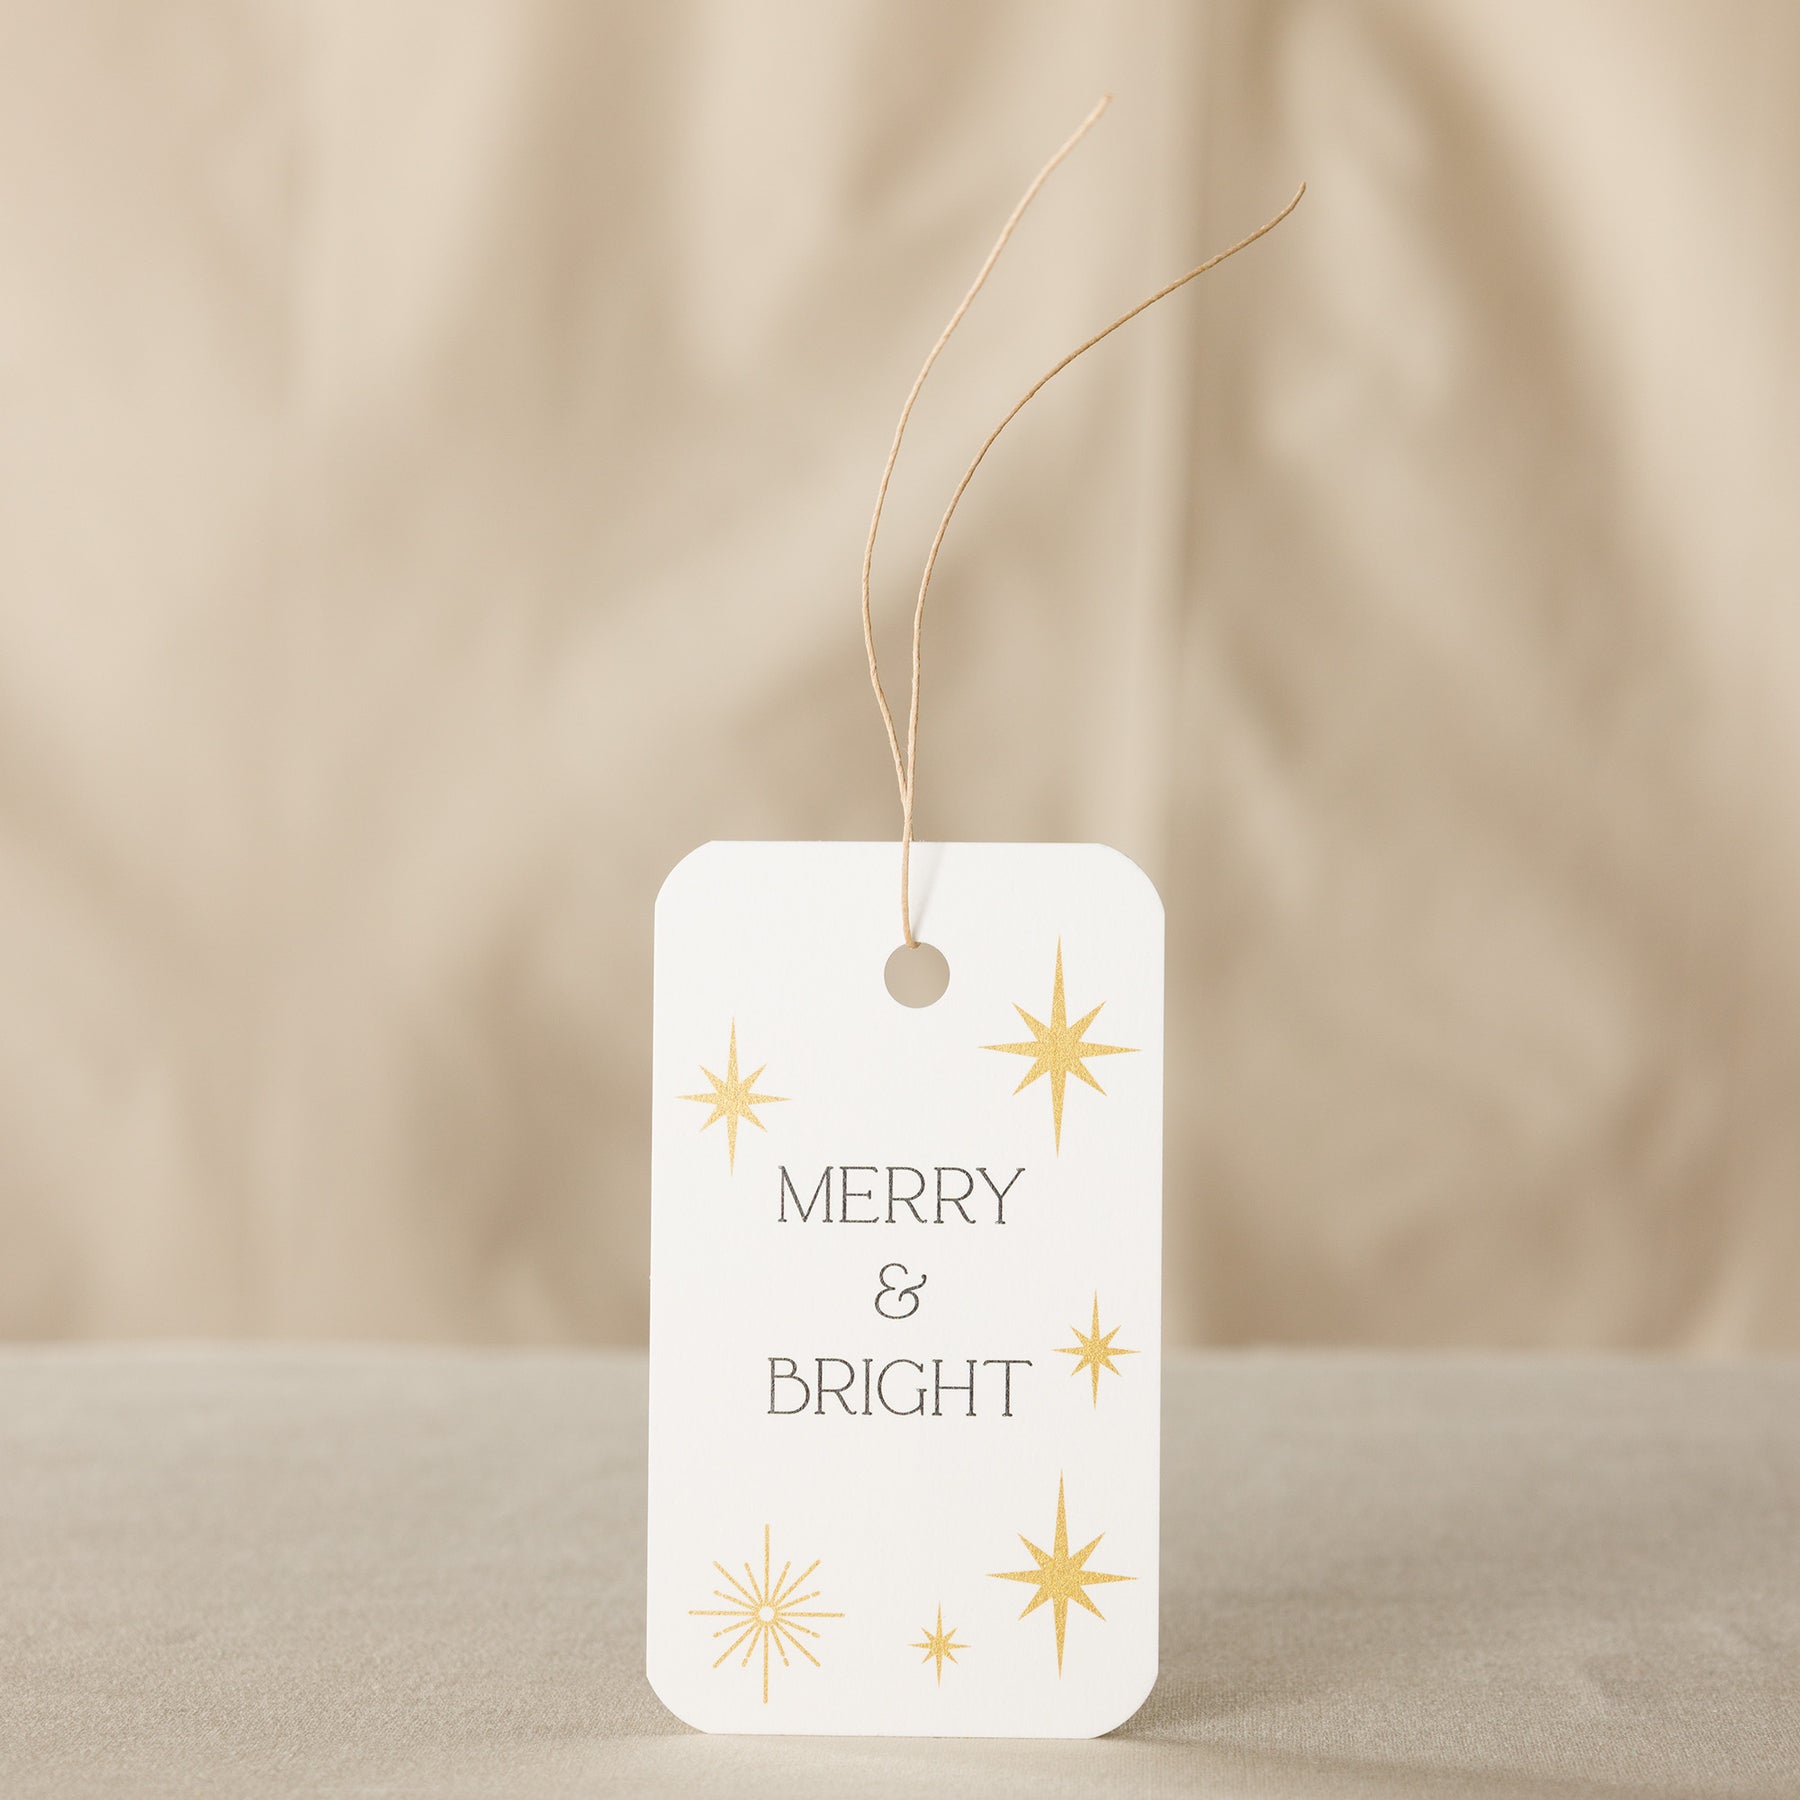 Merry & Bright Gift Tag - 10 Pack